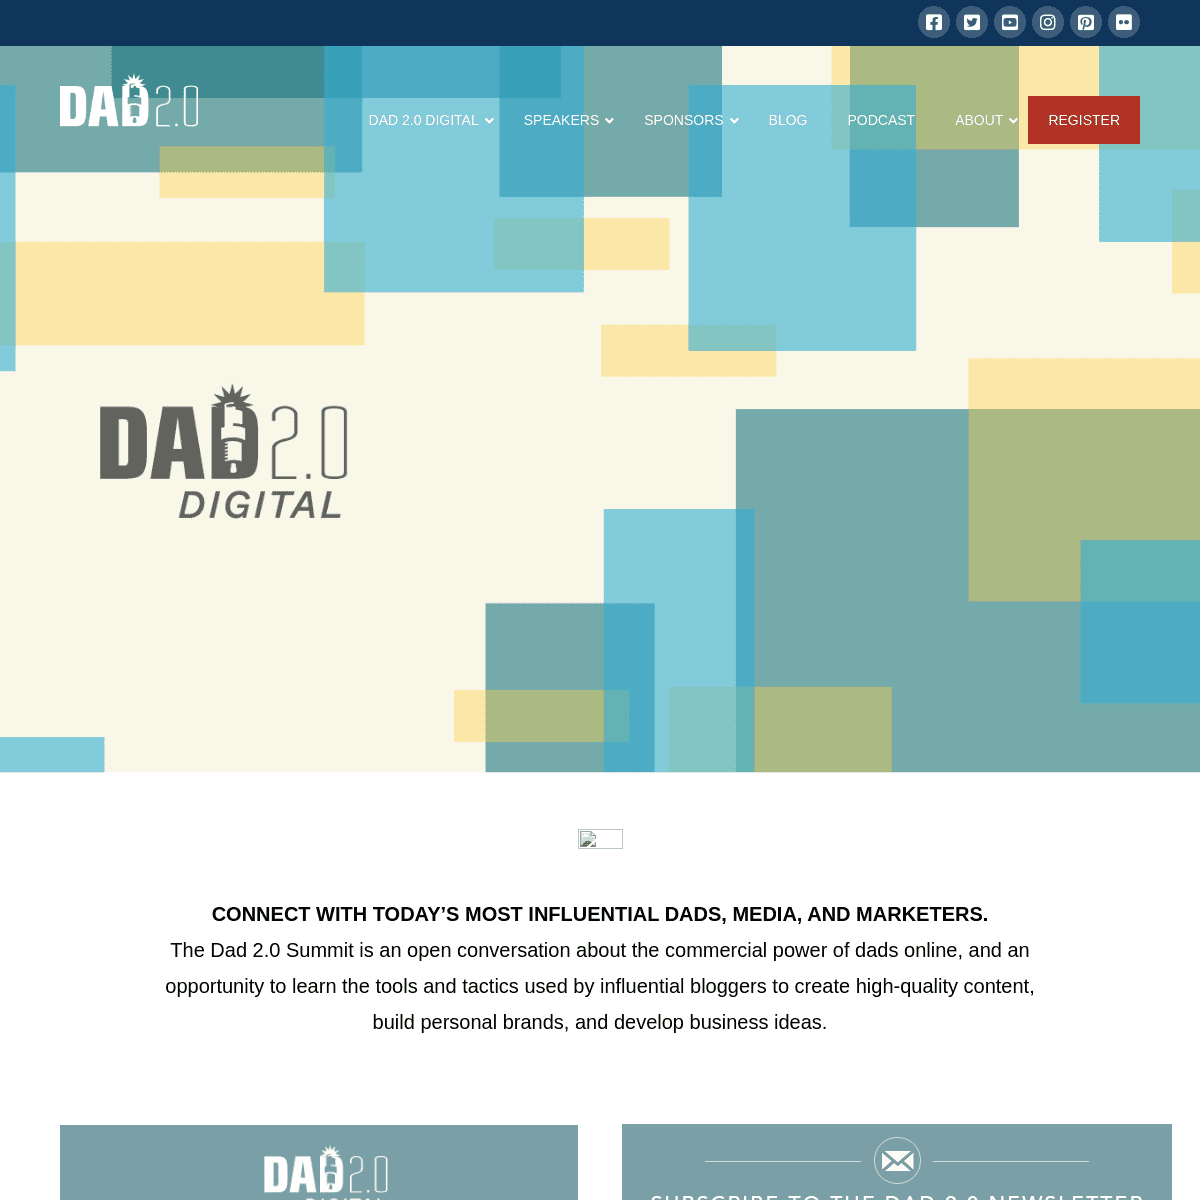 A complete backup of https://dad2summit.com